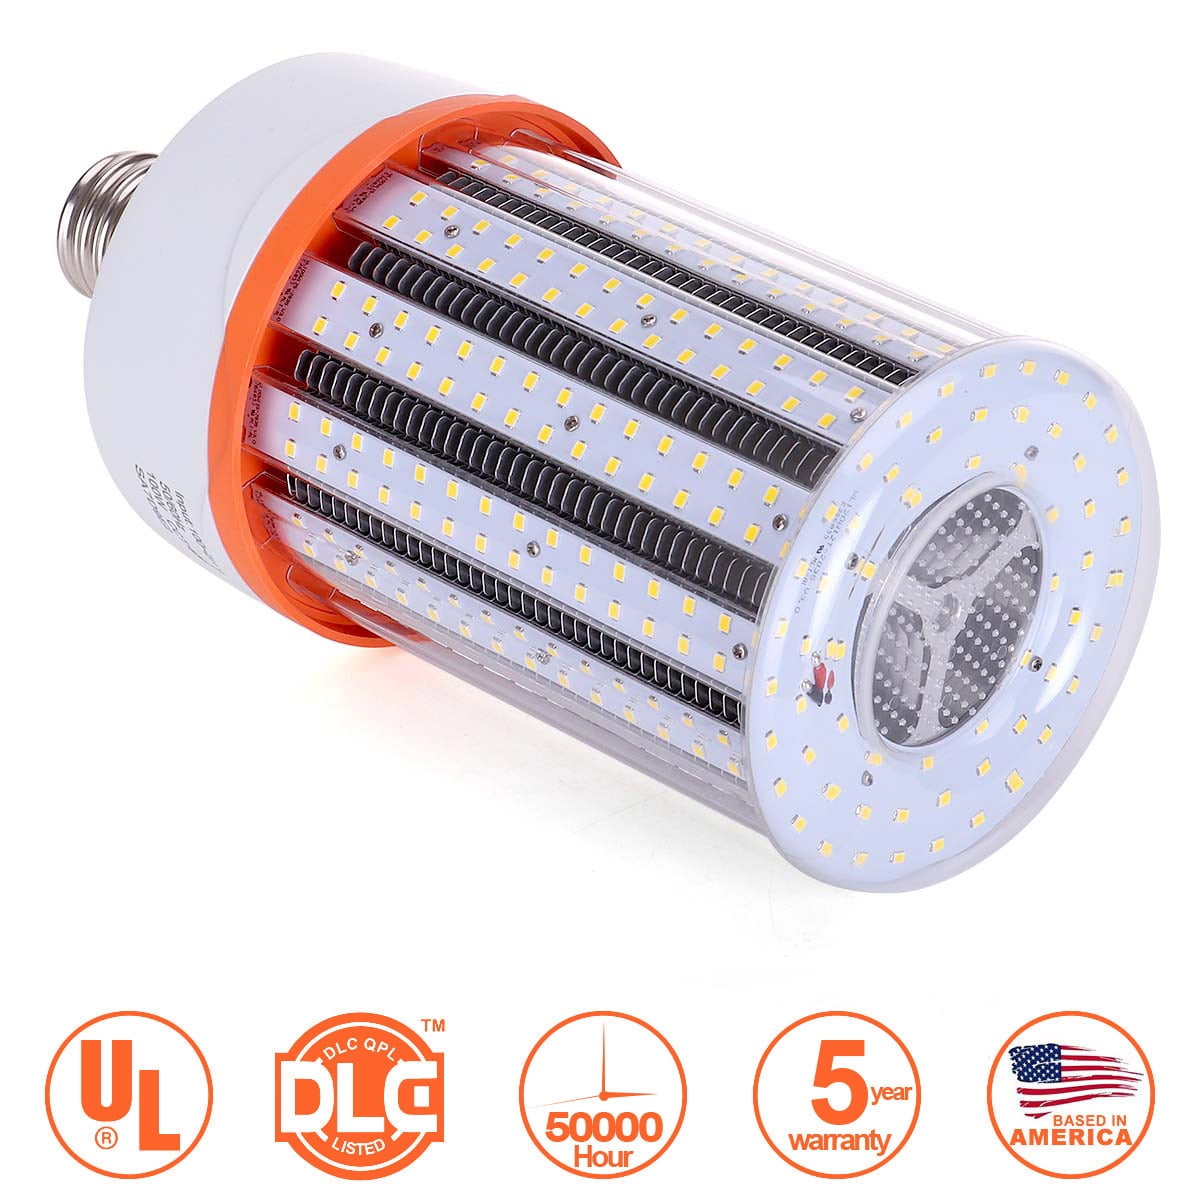 with E26 to E39 Base Adapter 14400Lumen for Home Garage Warehouse Factory Commercial Lighting and More XLQF Super Bright 120W LED Corn Light Bulbs 1200 Watt Equivalent 